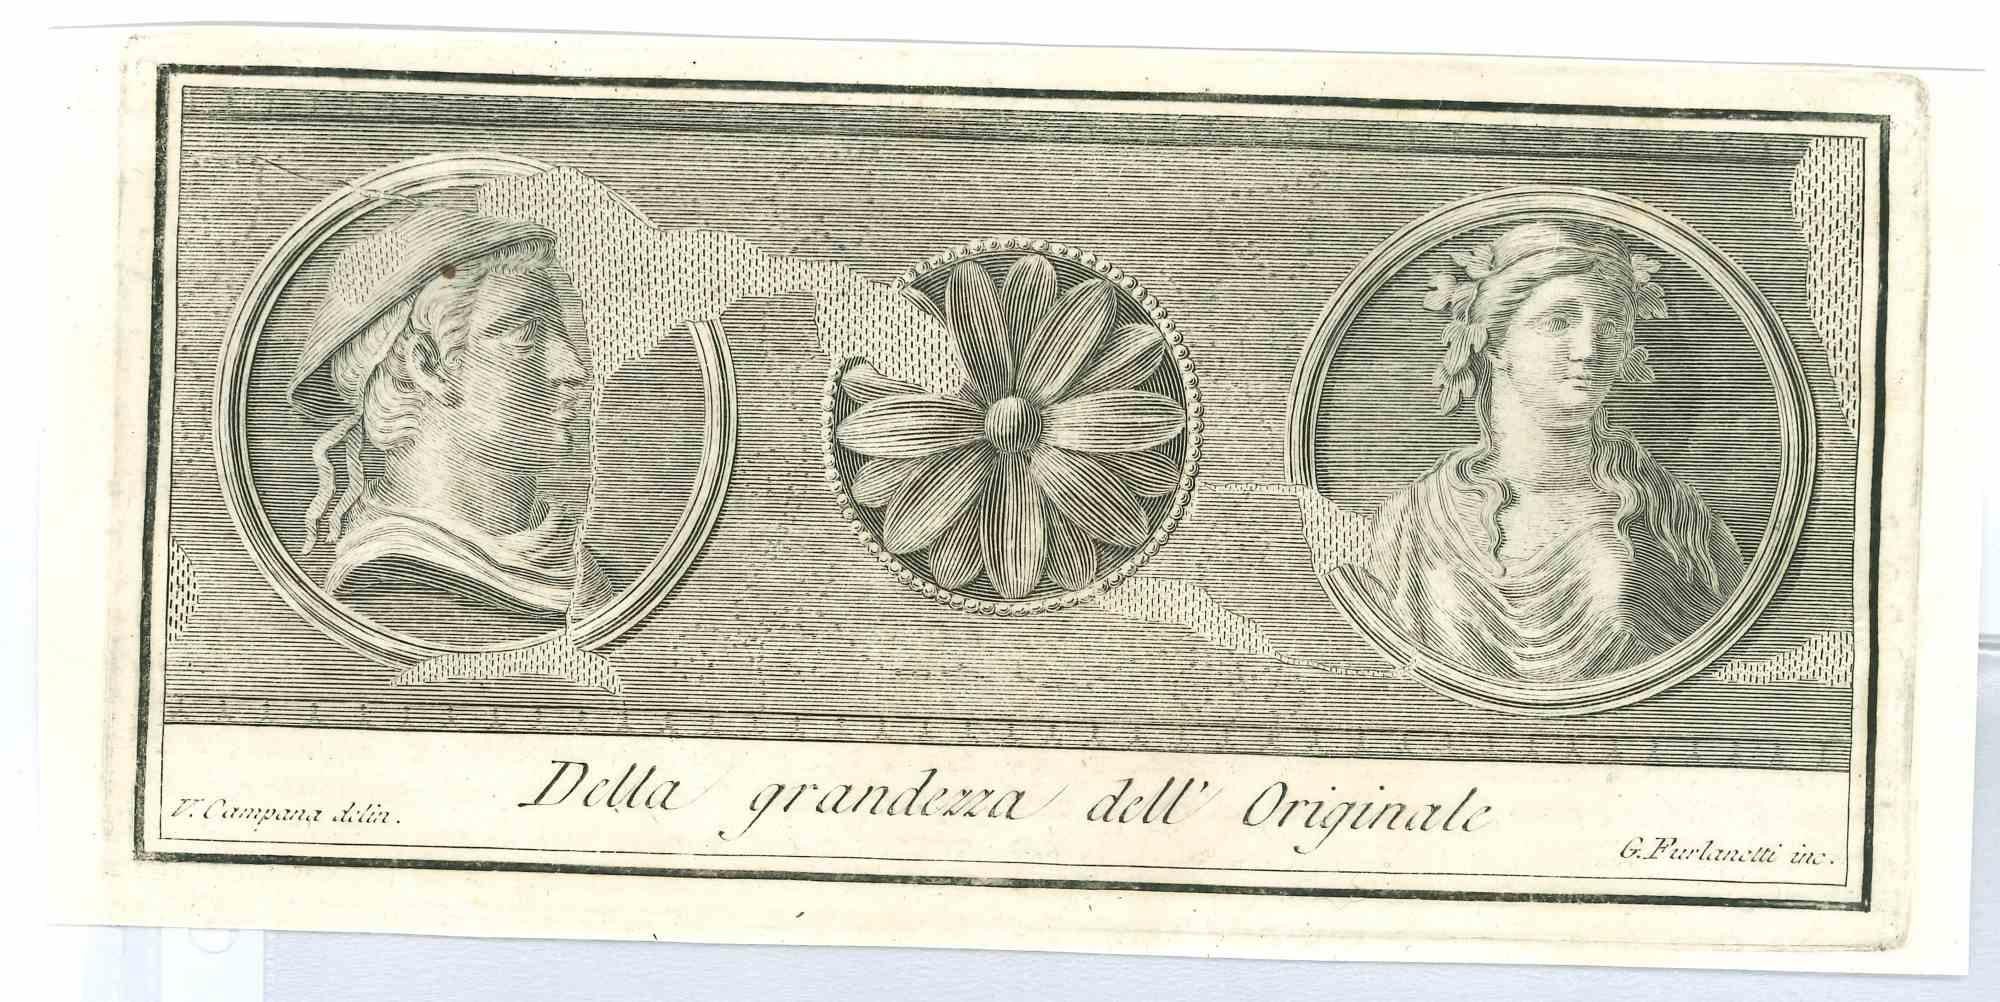 Ancient Roman Fresco Portraits, from the series "Antiquities of Herculaneum", is an original etching on paper realized by Vincenzo Campana in the 18th century.

Signed on the plate.

Guter Zustand.

The etching belongs to the print suite